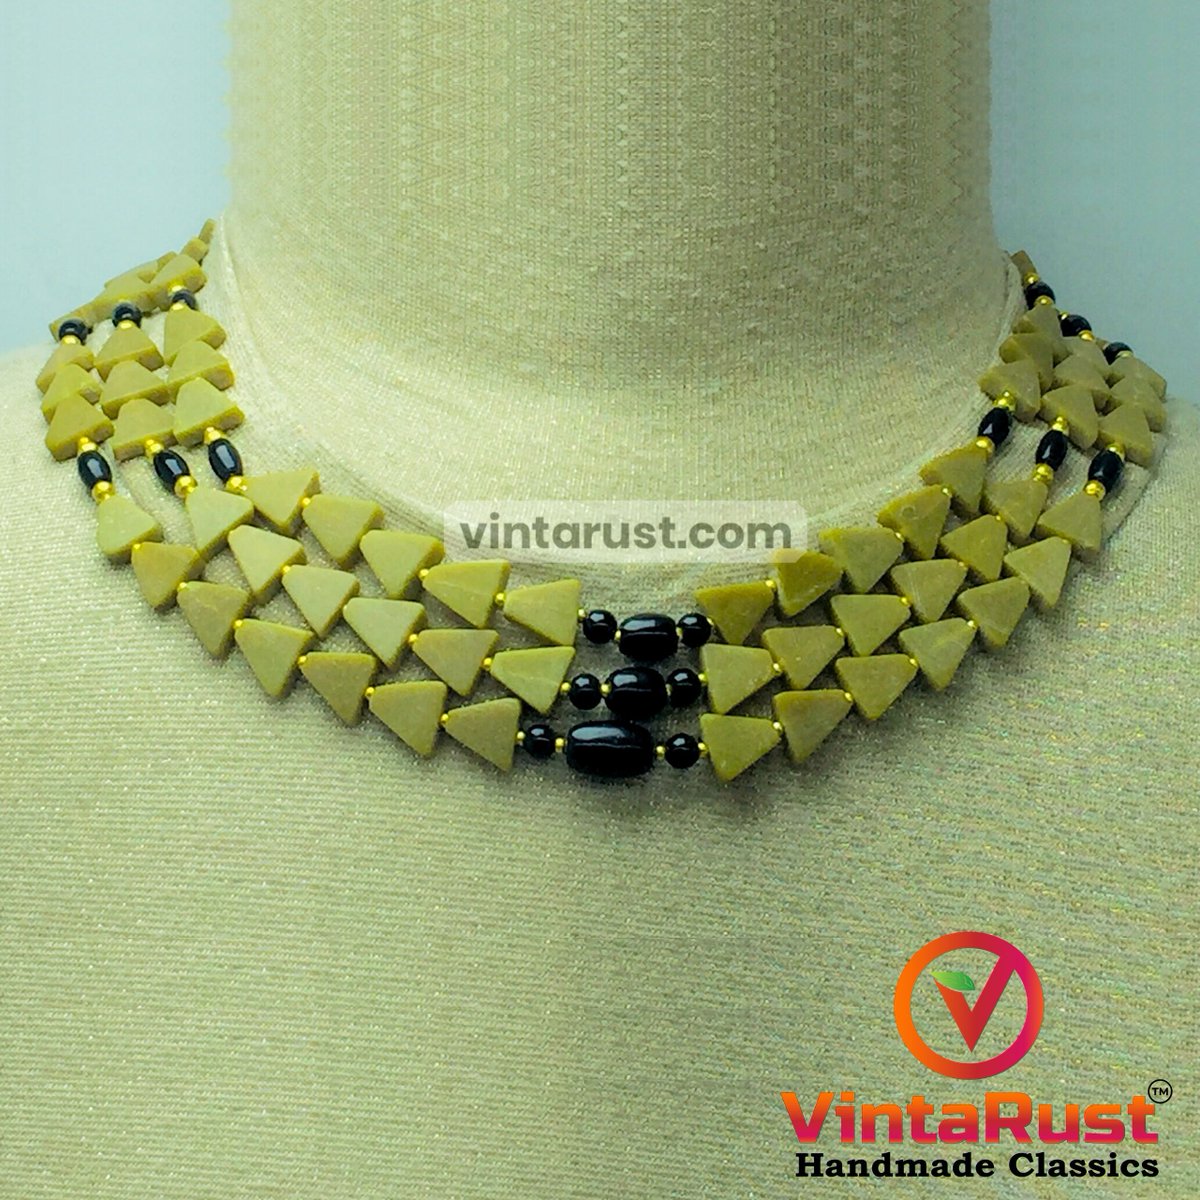 Tribal Multilayers Western Beaded Necklace.

Shop Now:
buff.ly/46VTNer

#vintarust #necklace #choker #chokernecklace #chokernecklaces #beadedjewelryofinstagram #beadedjewelry #victorianjewelry #victorianjewellery #antiquejewelry #antiquejewellery #bestofetsy #pearljewelry